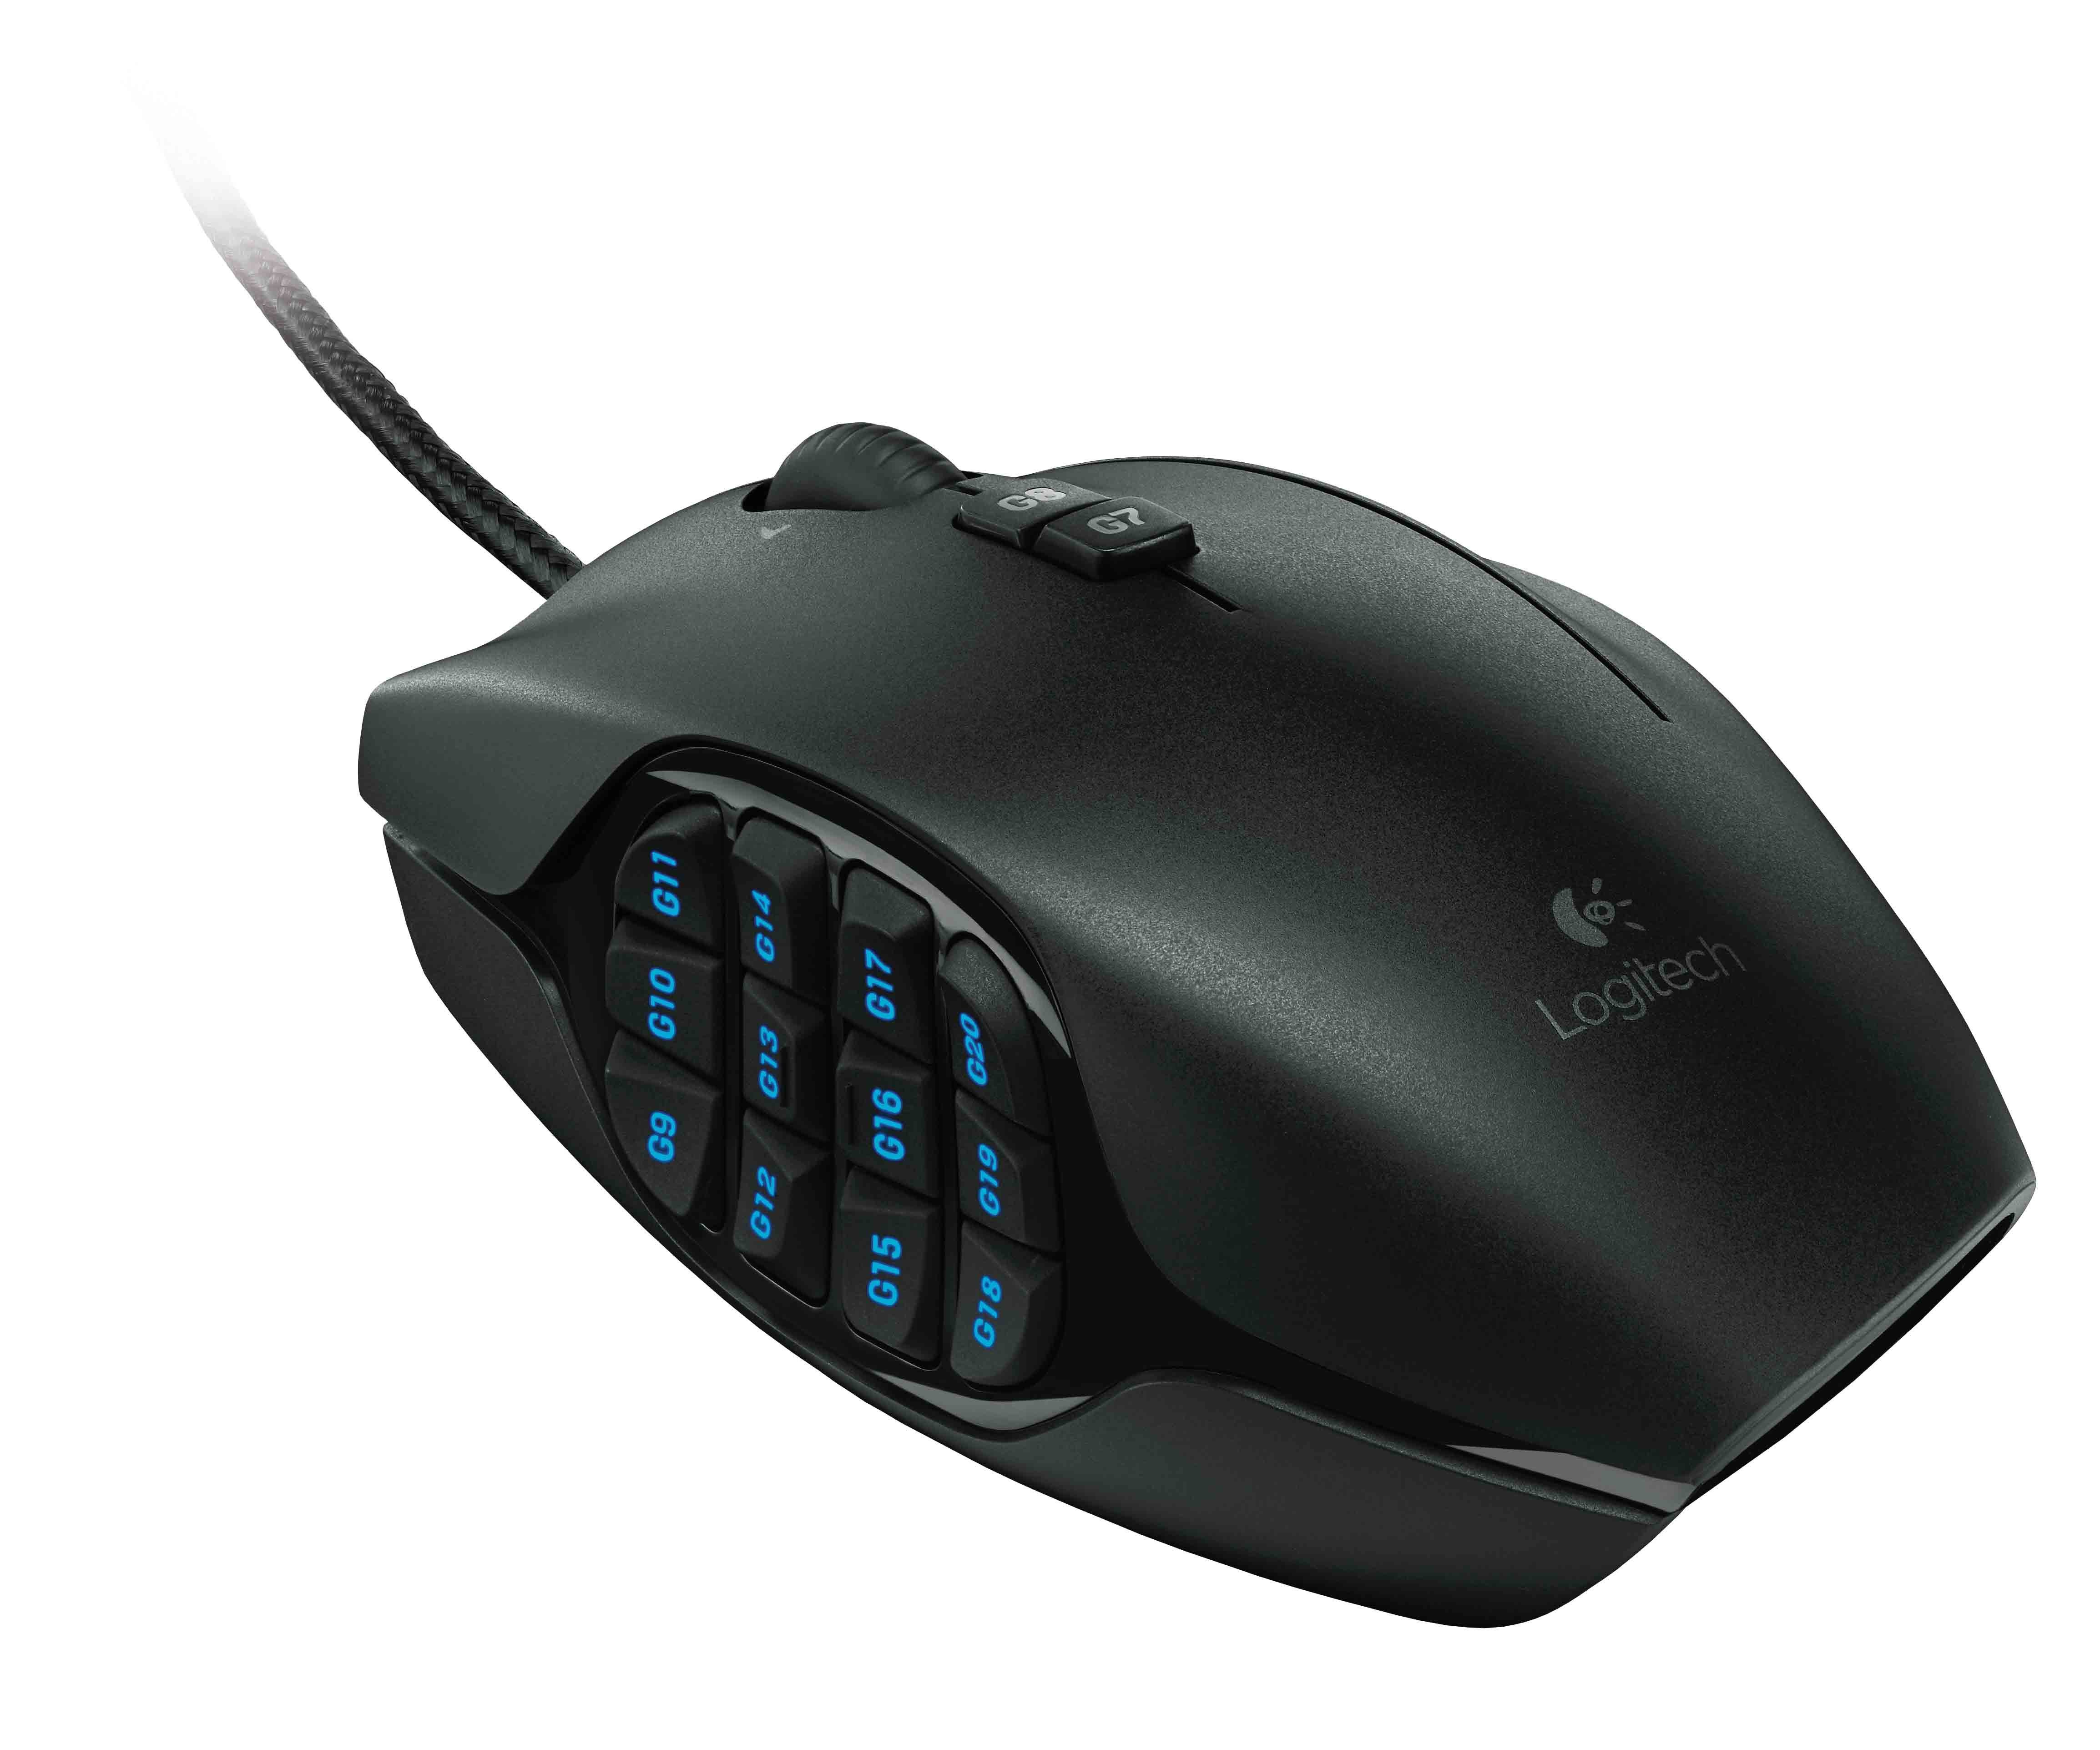 Logitech_G600_MMO_Gaming_Mouse_highres.j